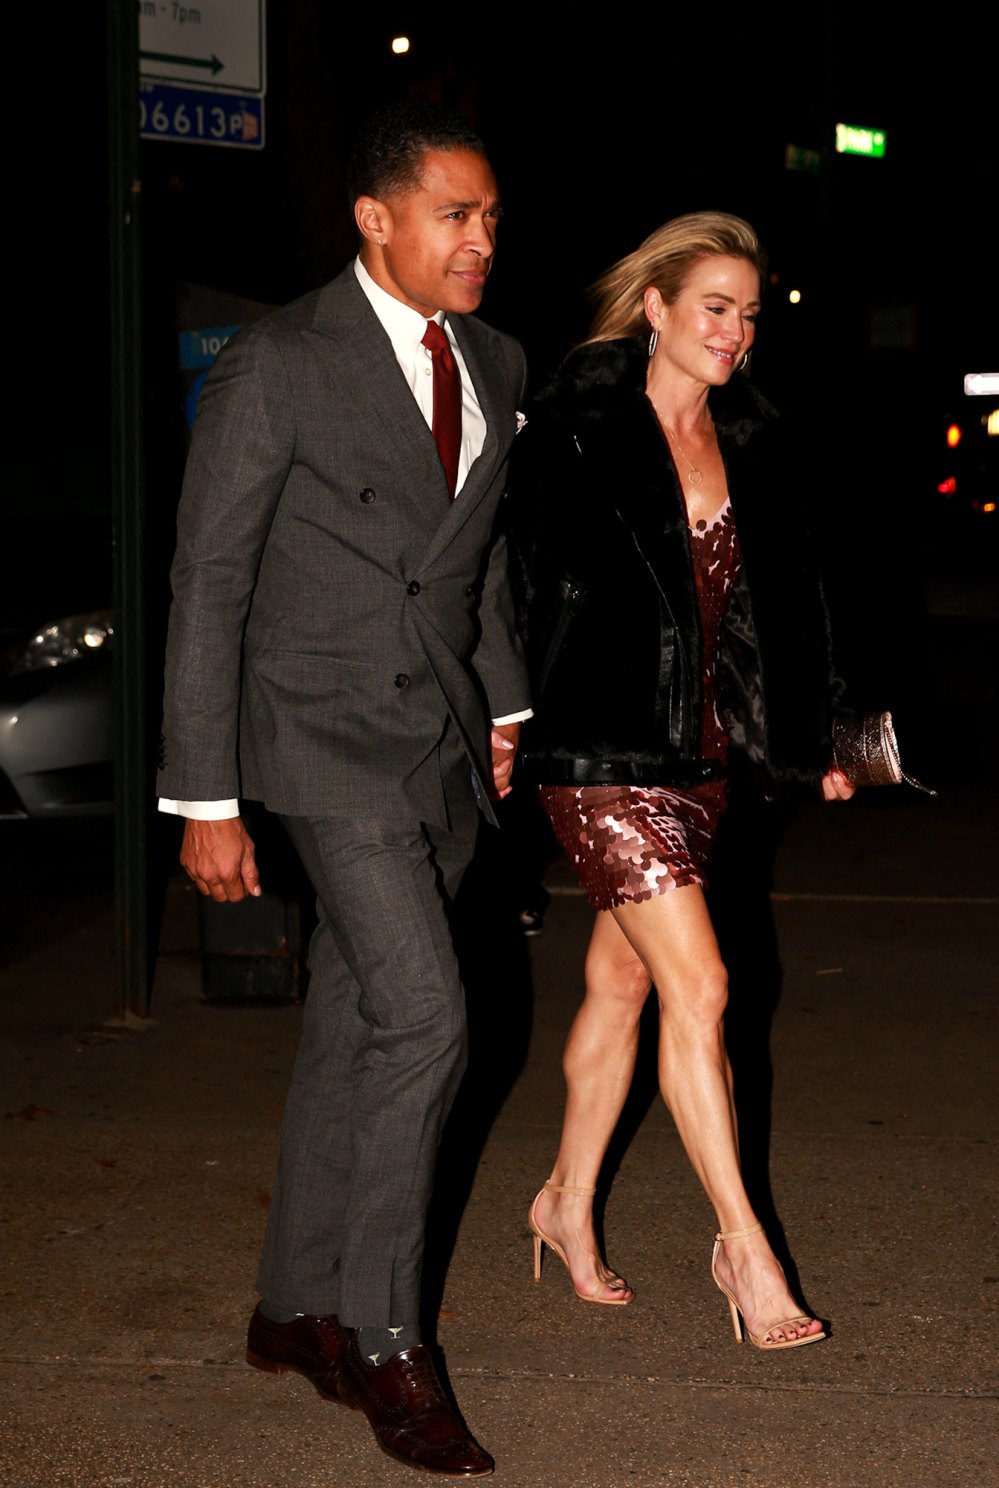 Amy Robach and TJ Holmes Hold Hands in NYC: Photos